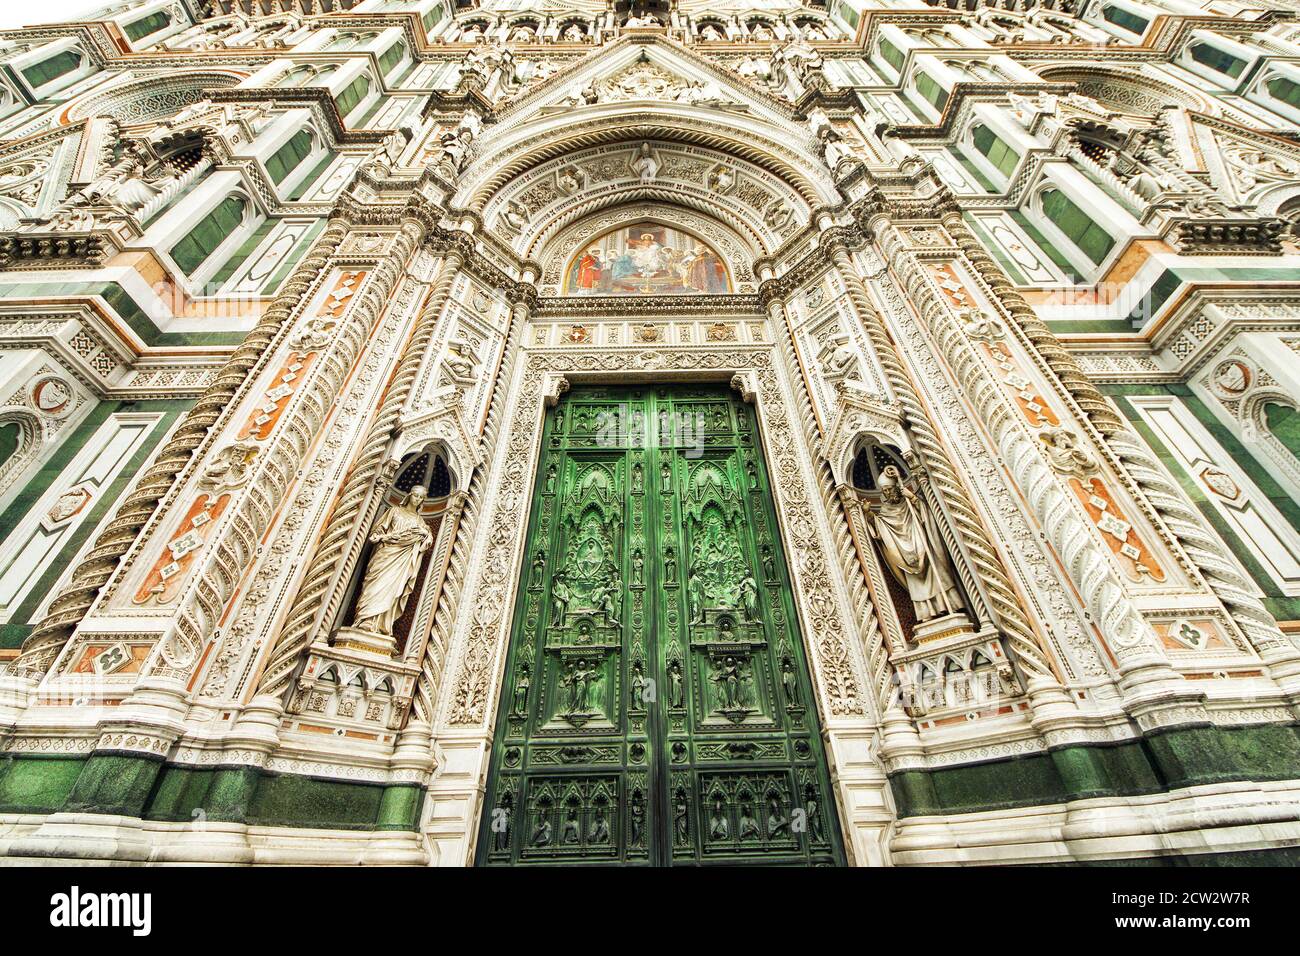 The Basilica di Santa Maria del Fiore (Basilica of Saint Mary of the Flower) and the surrounding architecture, Florence, Italy Stock Photo